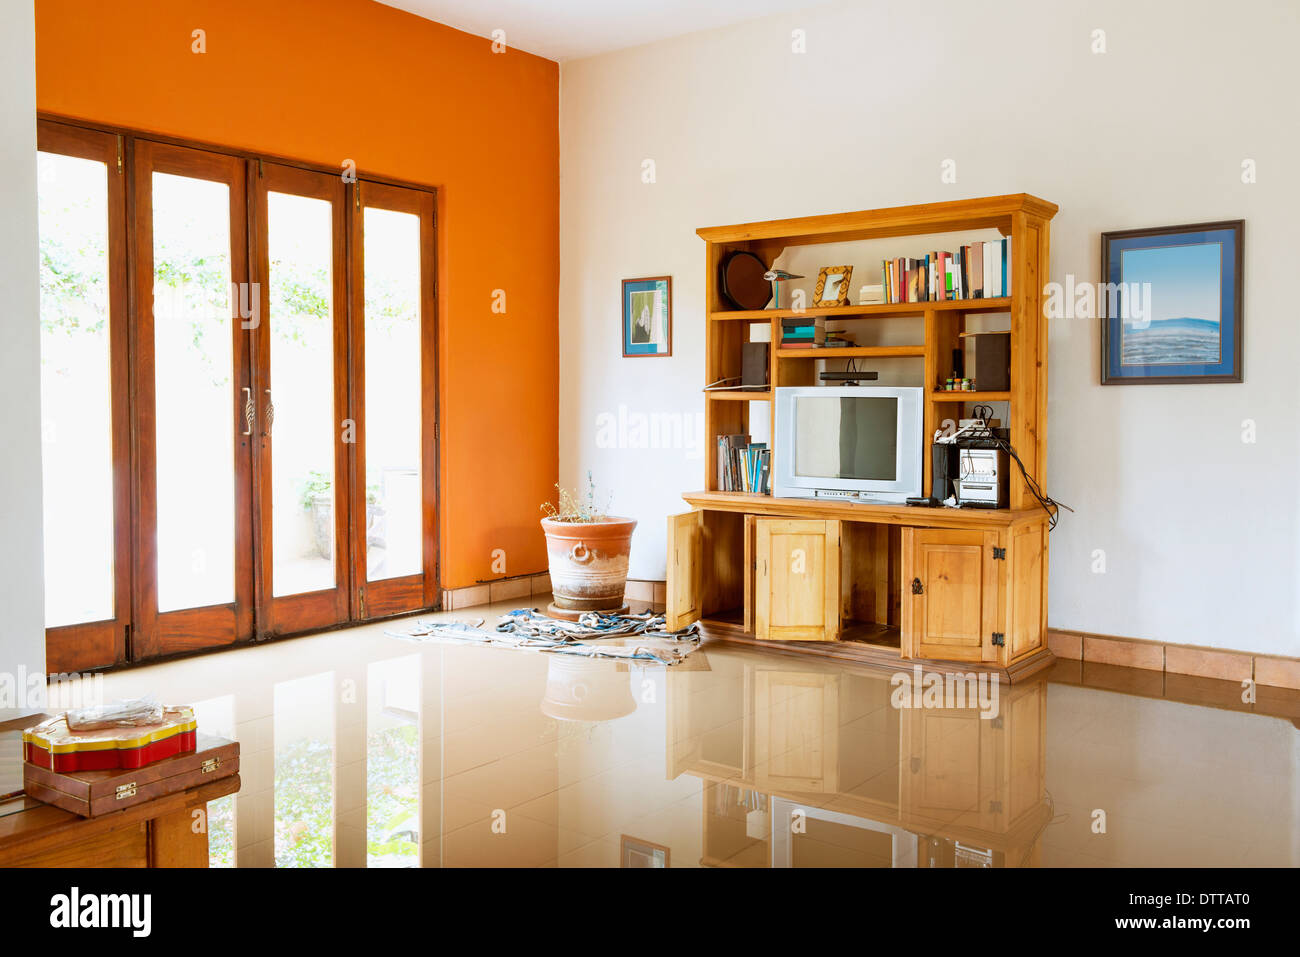 Media center and windows of flooded house Stock Photo